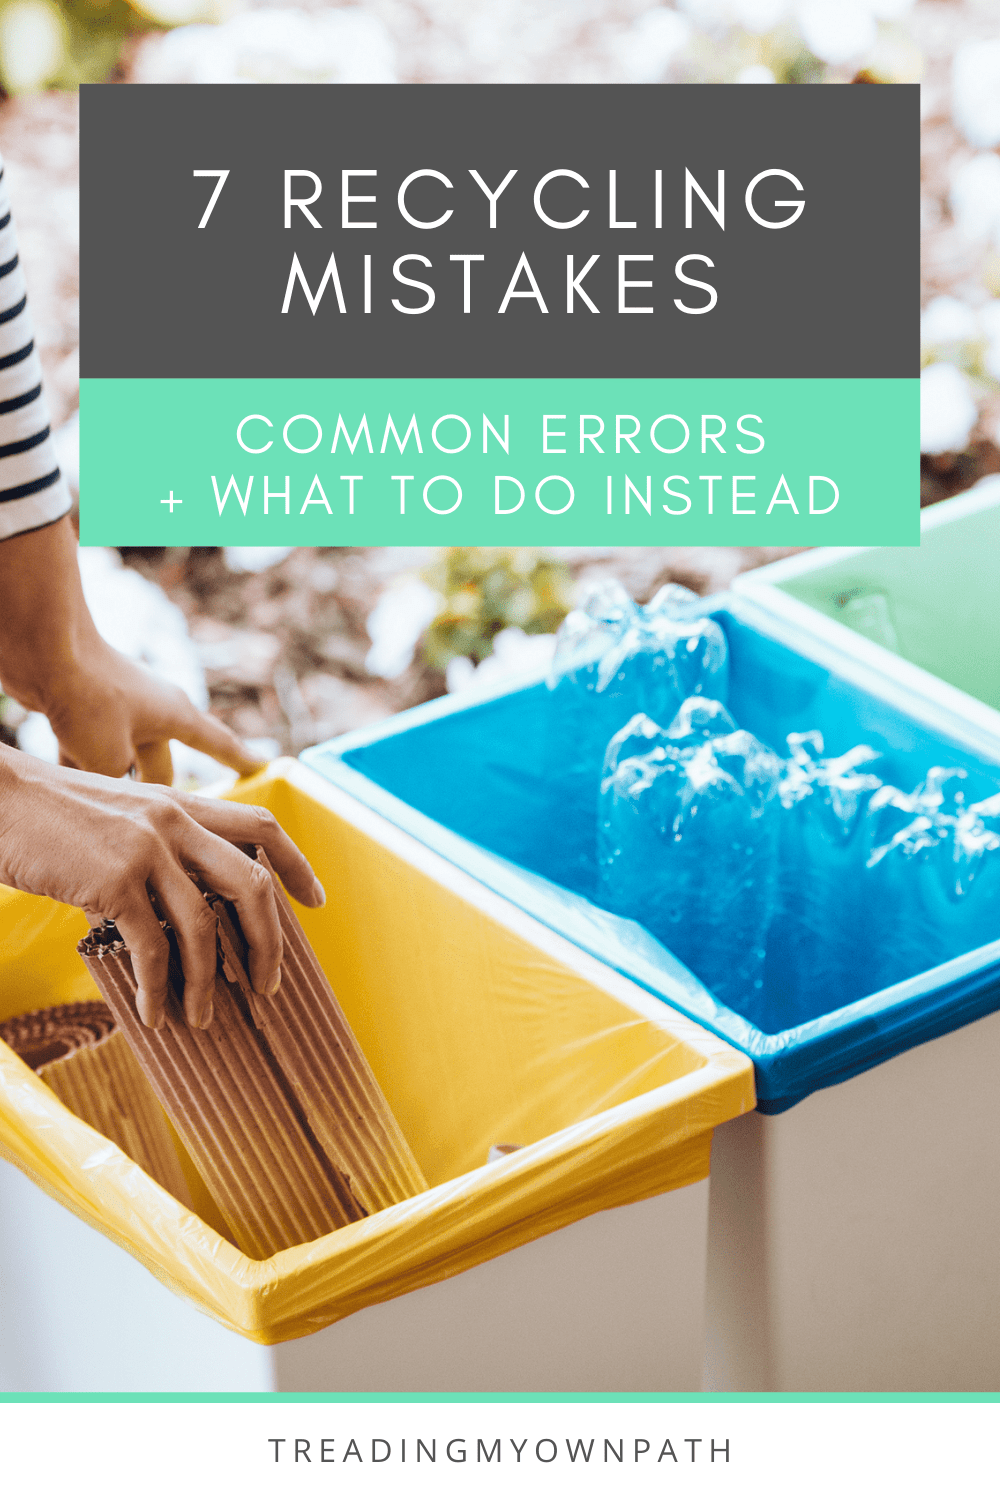 7 common recycling mistakes that people make (+ what to do instead)